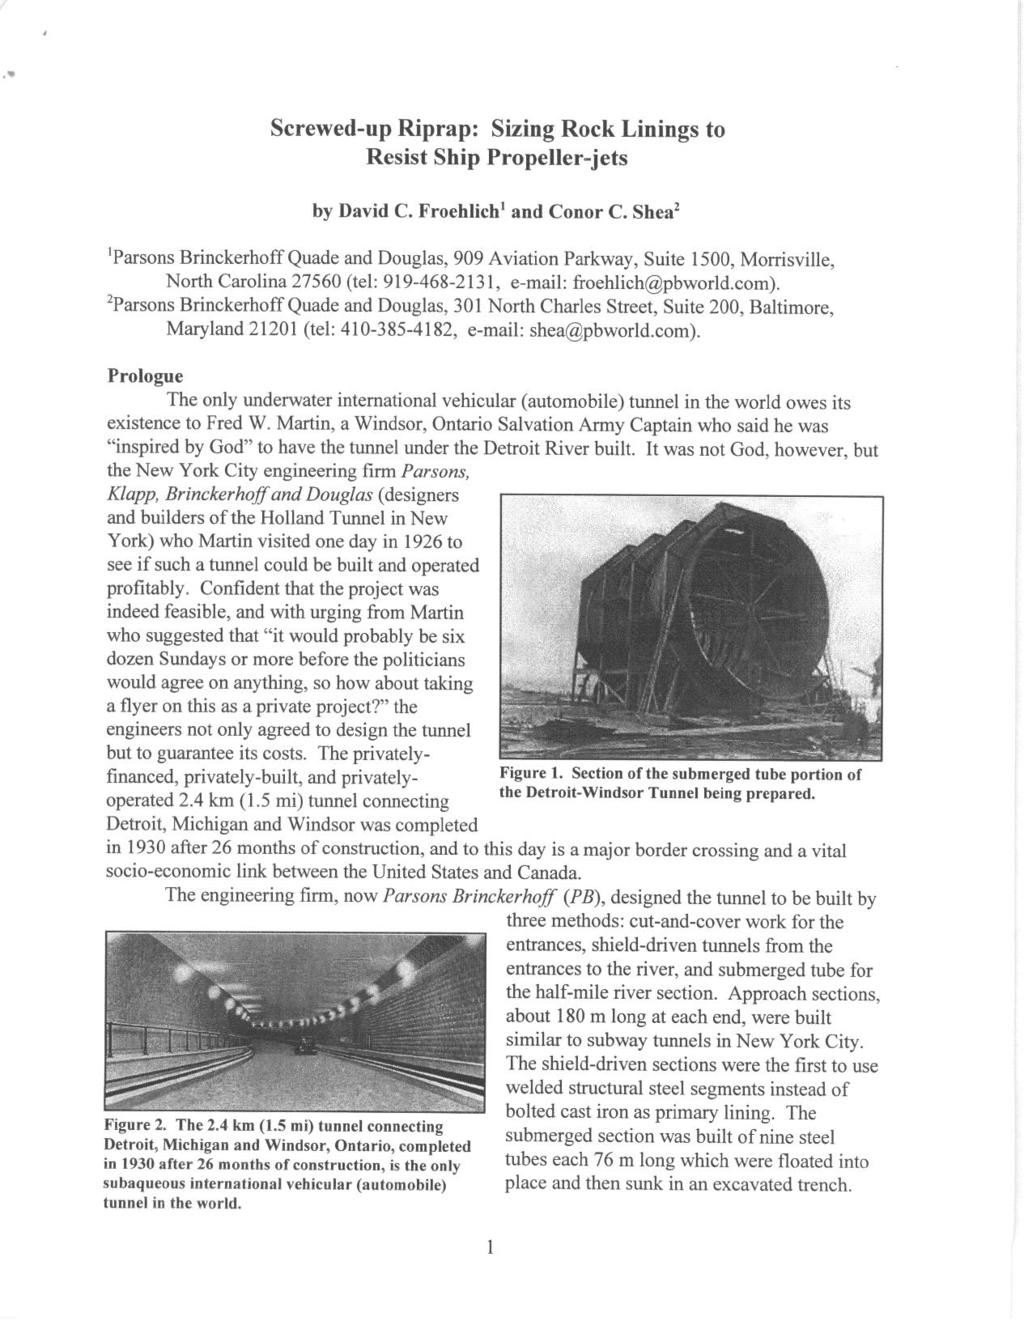 Screwed-up Riprap: Sizing Rock Linings to Resist Ship Propeller-jets by David C. Froehlich and Conor C. Shea Downloaded from ascelibrary.org by North Carolina State University on 09/01/13.